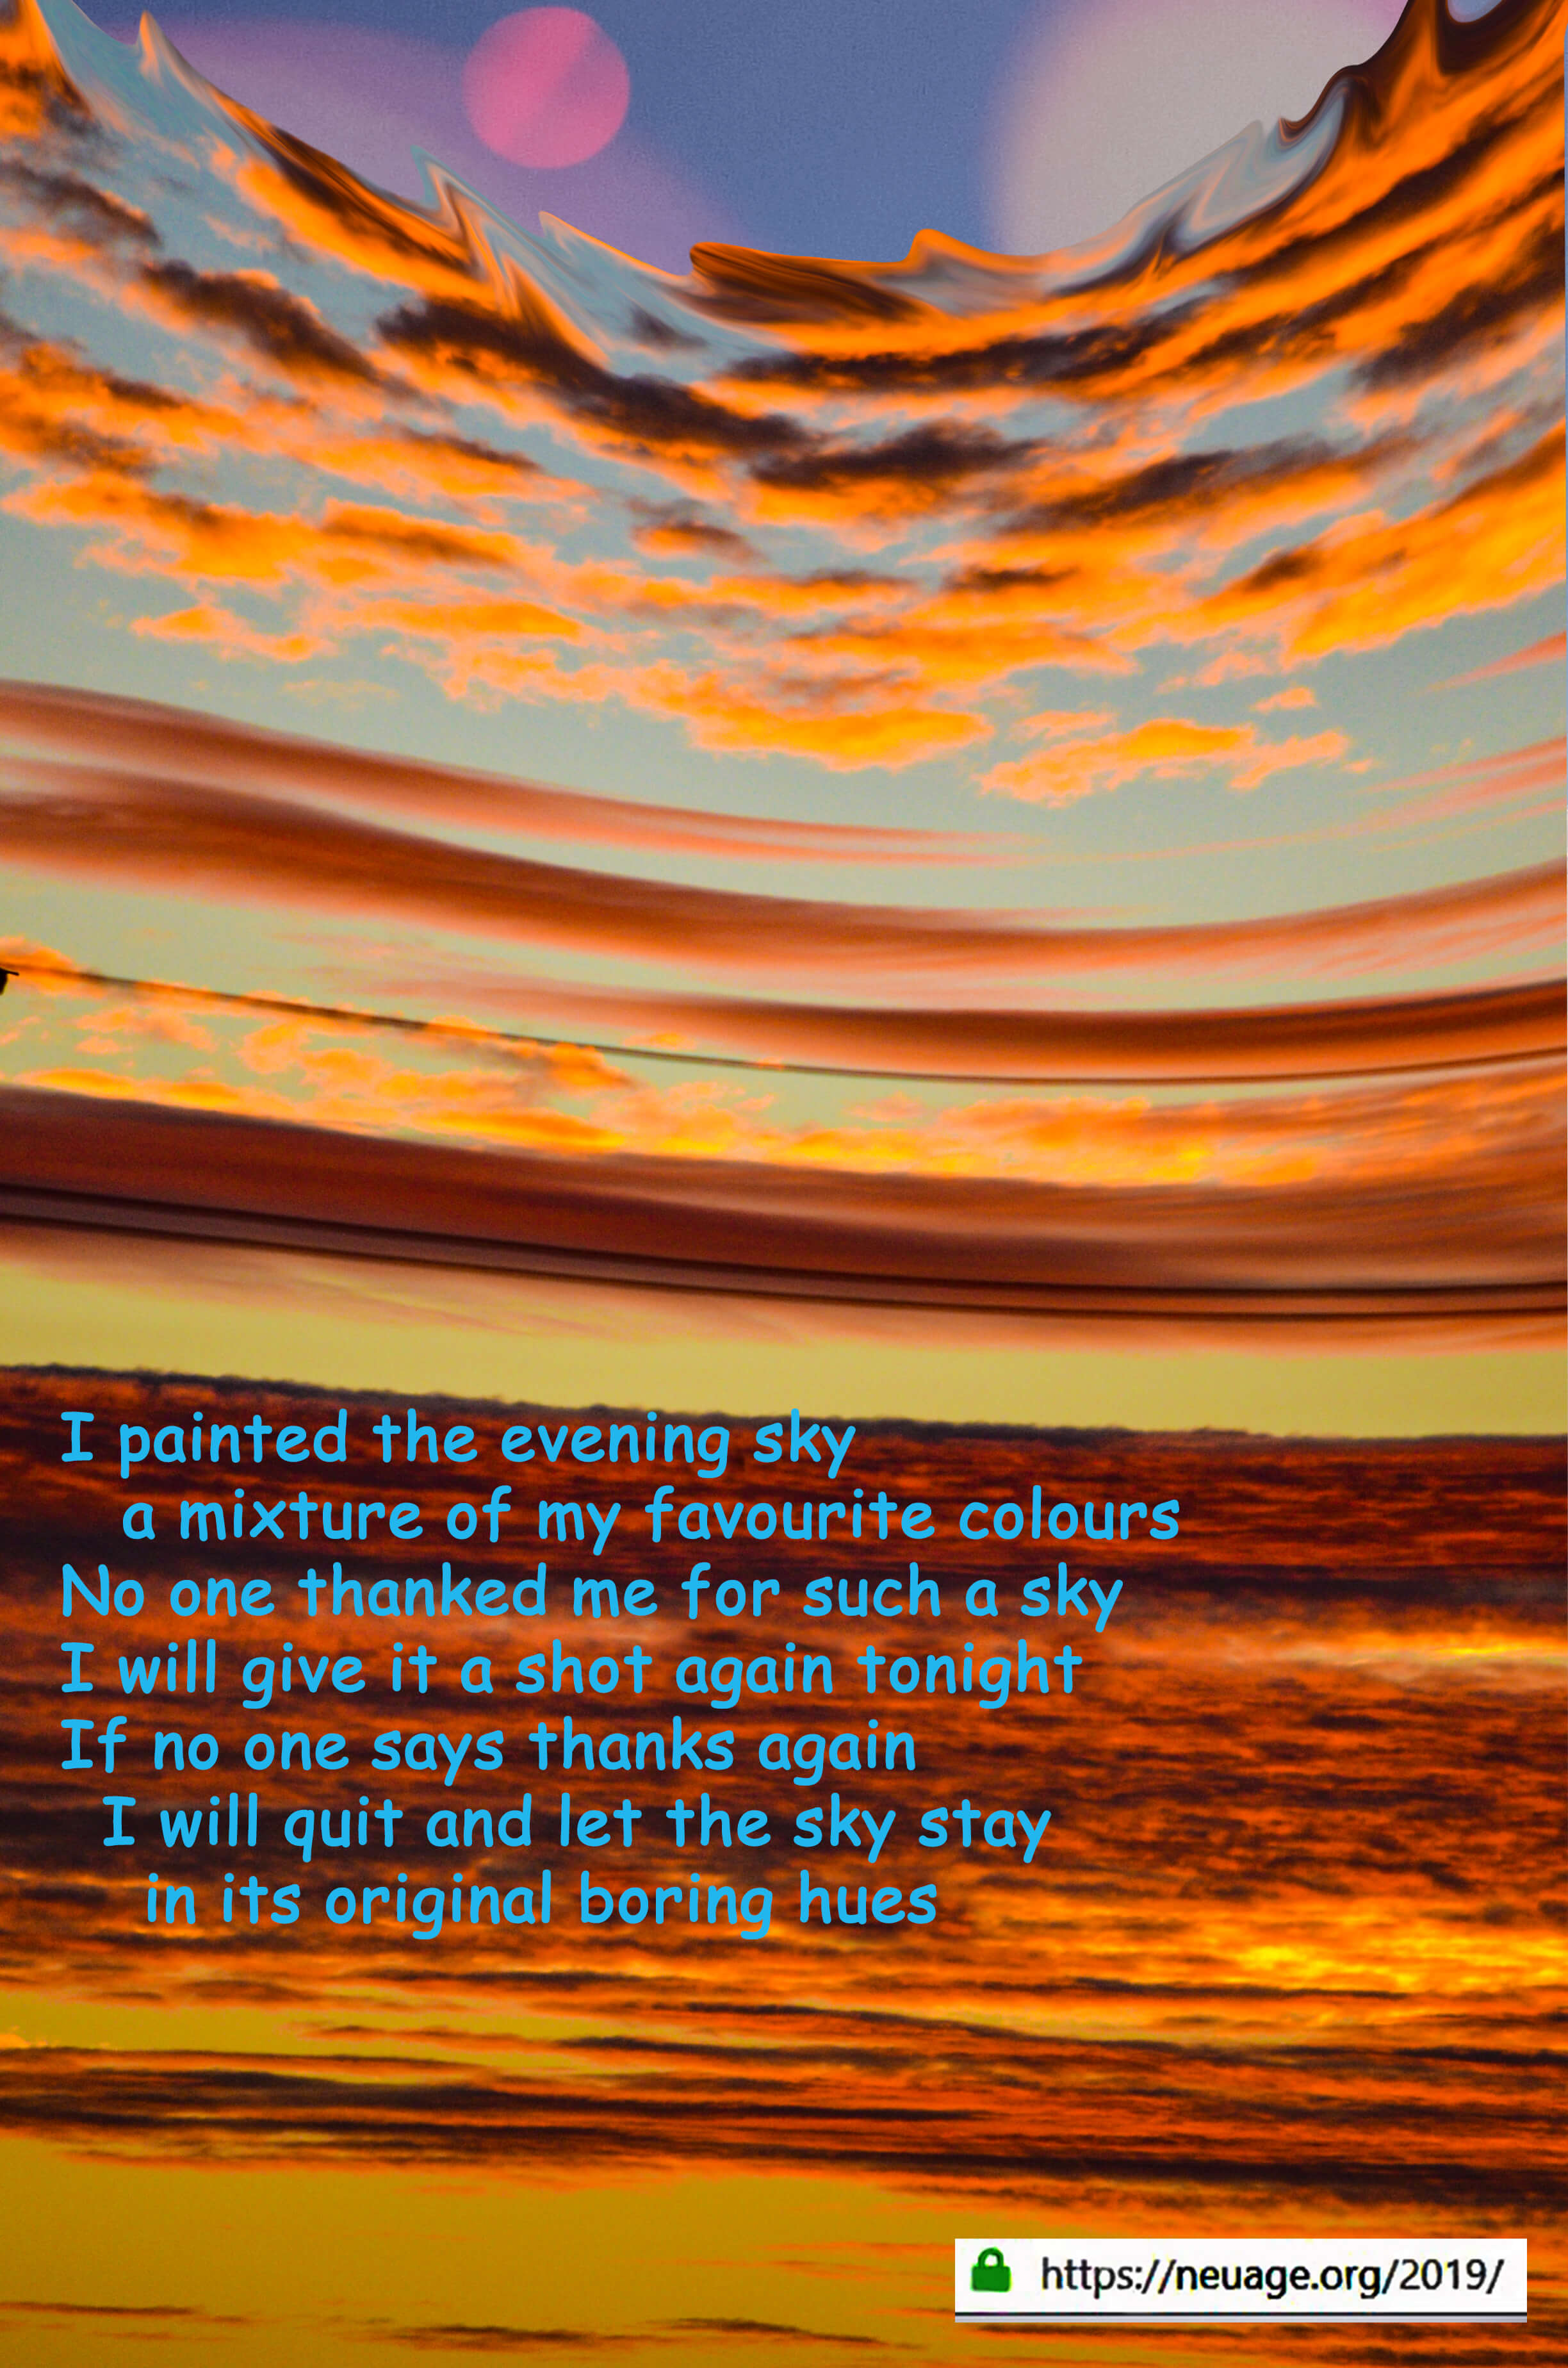 I painted the evening sky
a mixture of my favourite colours 
No one thanked me 
for such a sky
I will give it a shot again tonight
If no one says thanks again 
I will quit 
and let the sky stay 
in its original boring hues